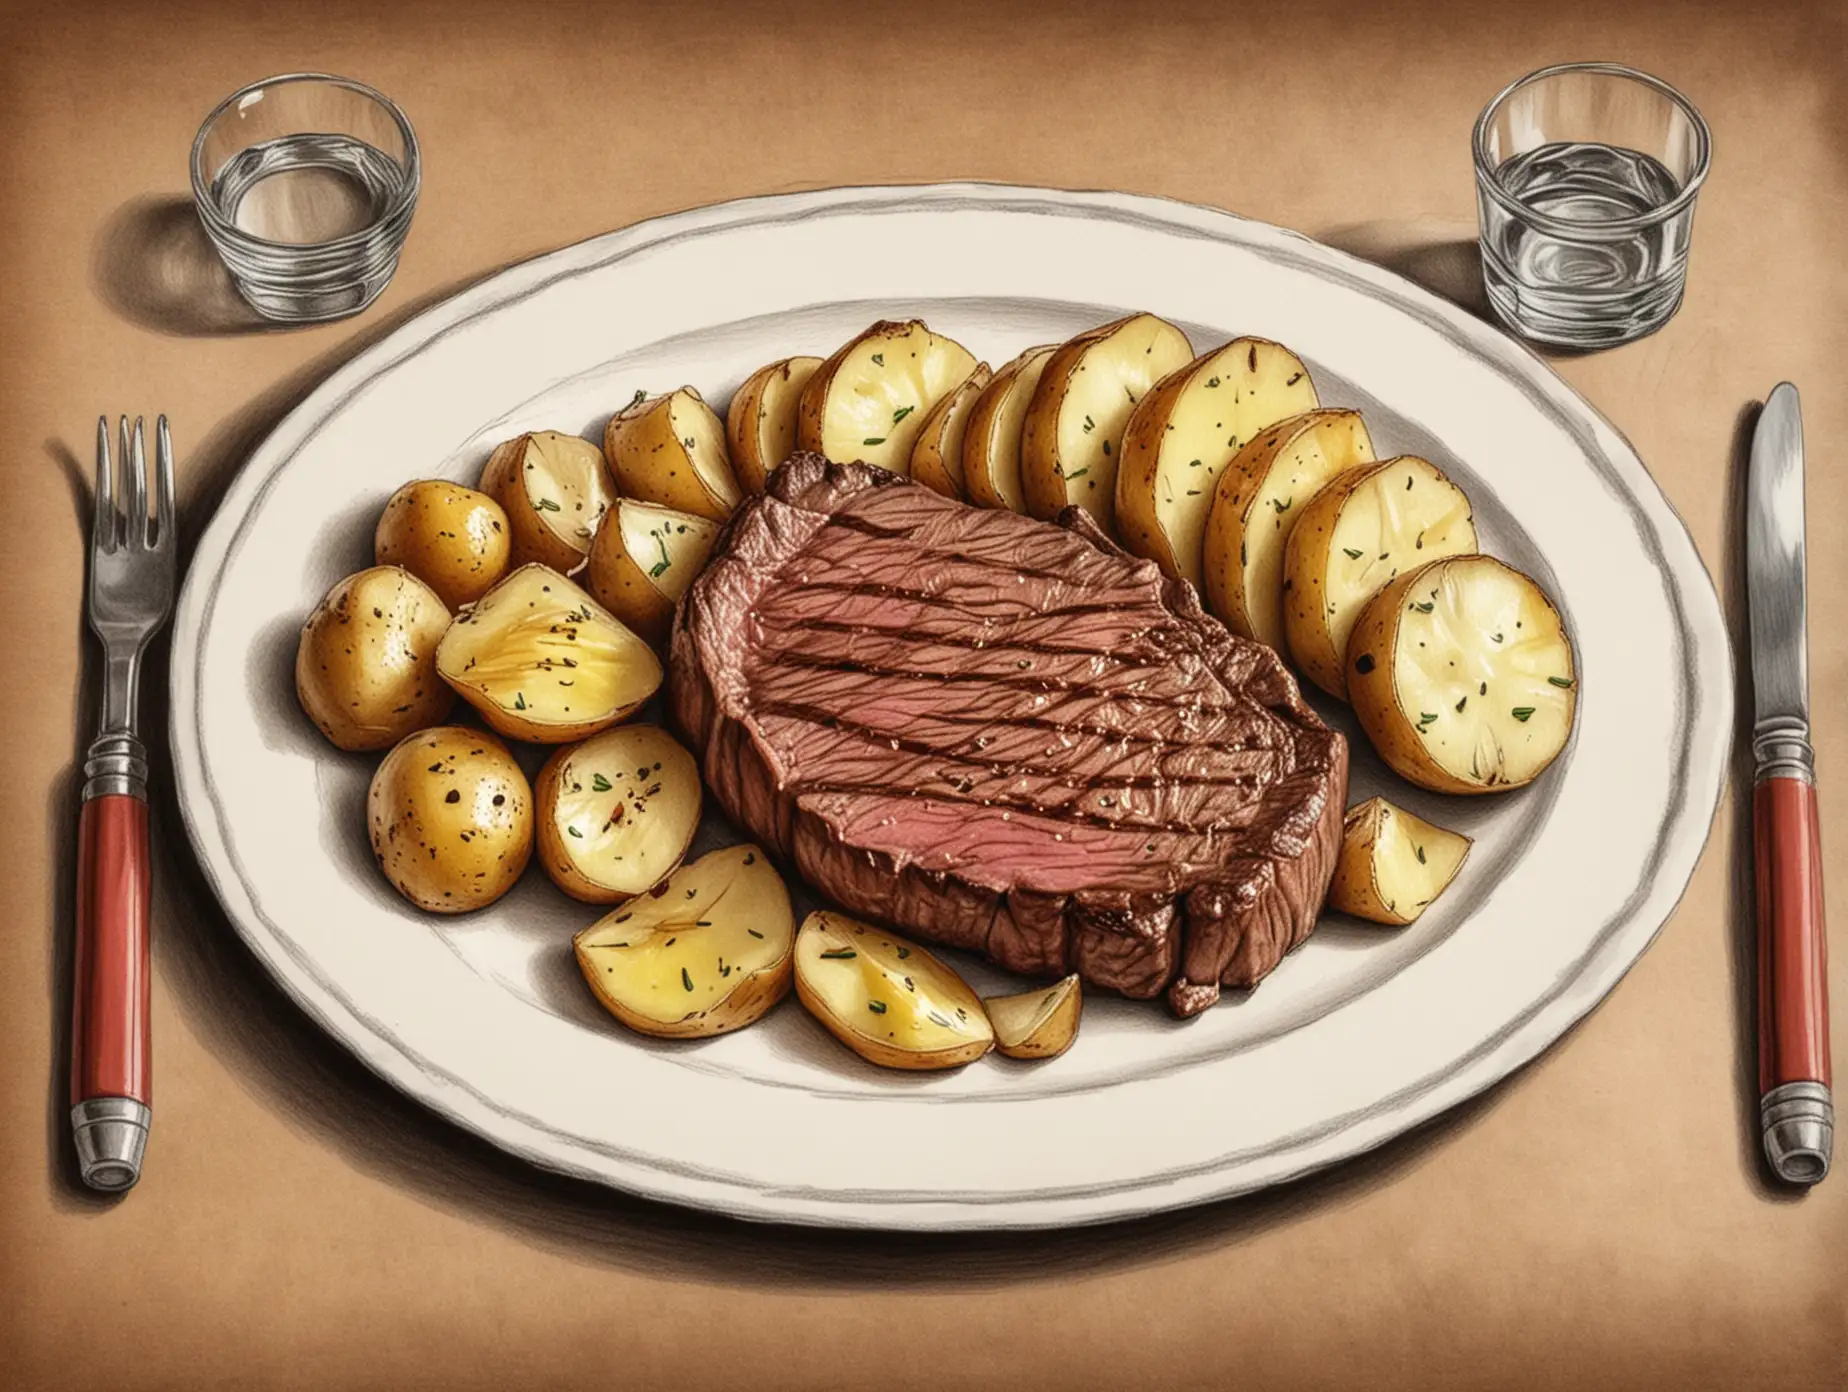 Hand Drawn Colored Pencil Sketch of Steak and Potatoes on a Dinner Plate